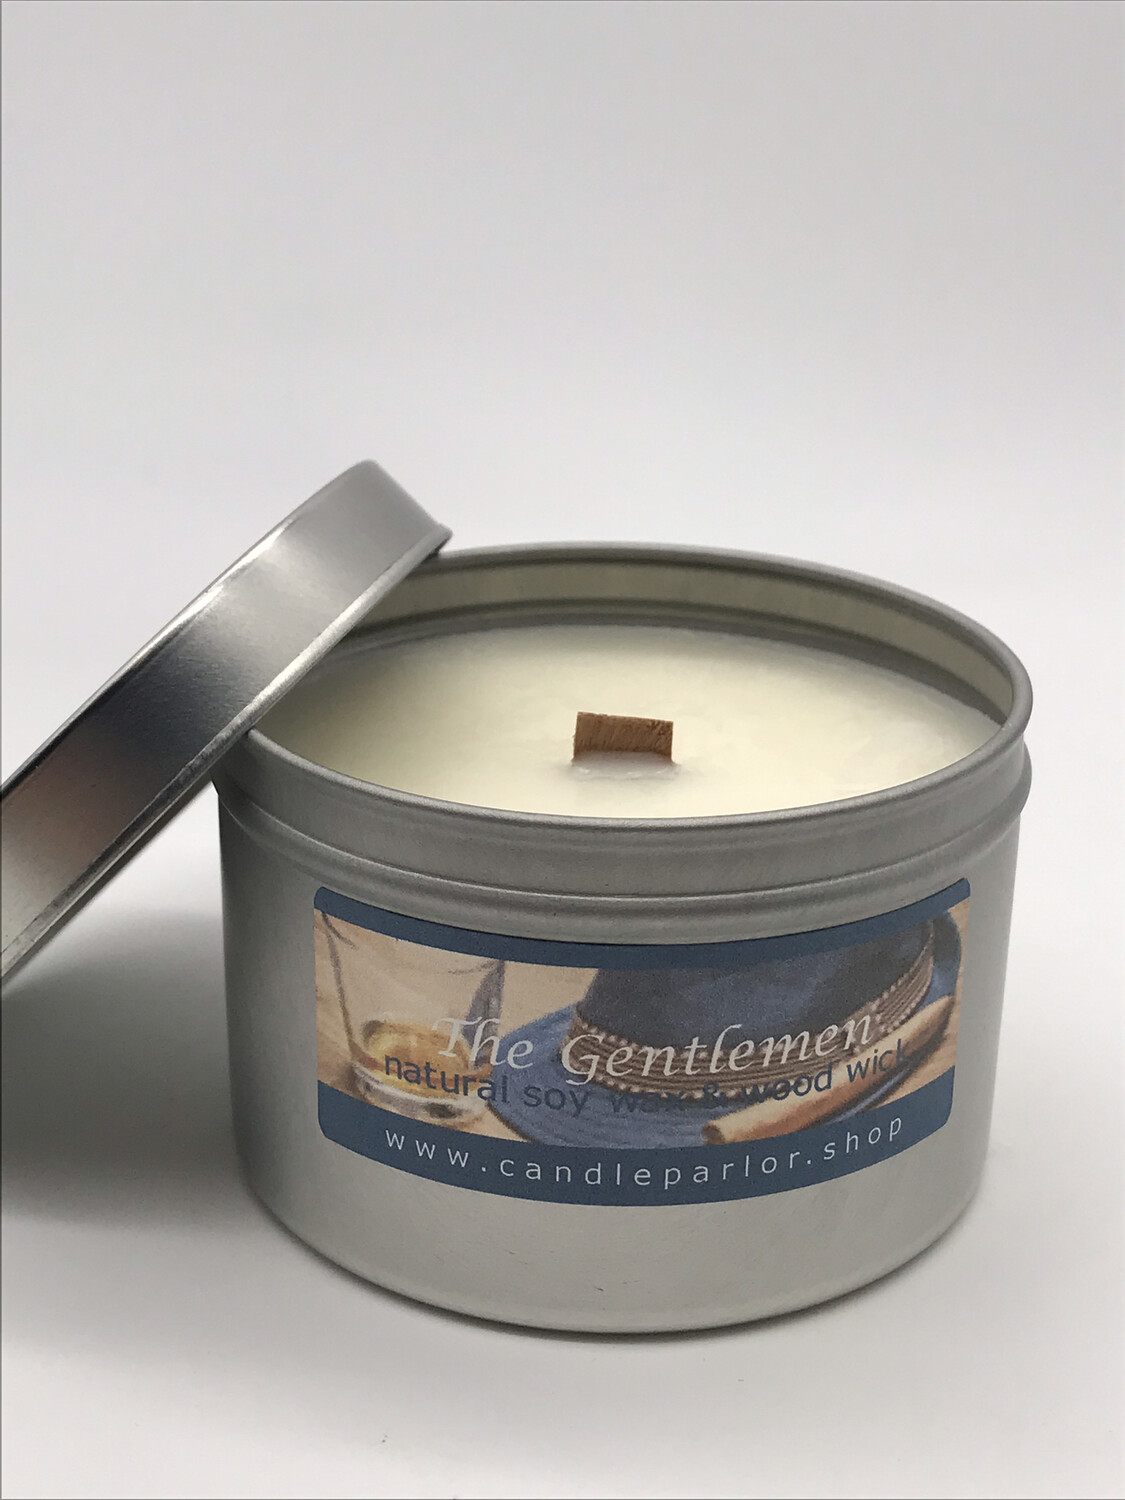 Gentlemen’s  Cologne Scented Soy Wax Candle with Wood Wick, 6 oz Tin.